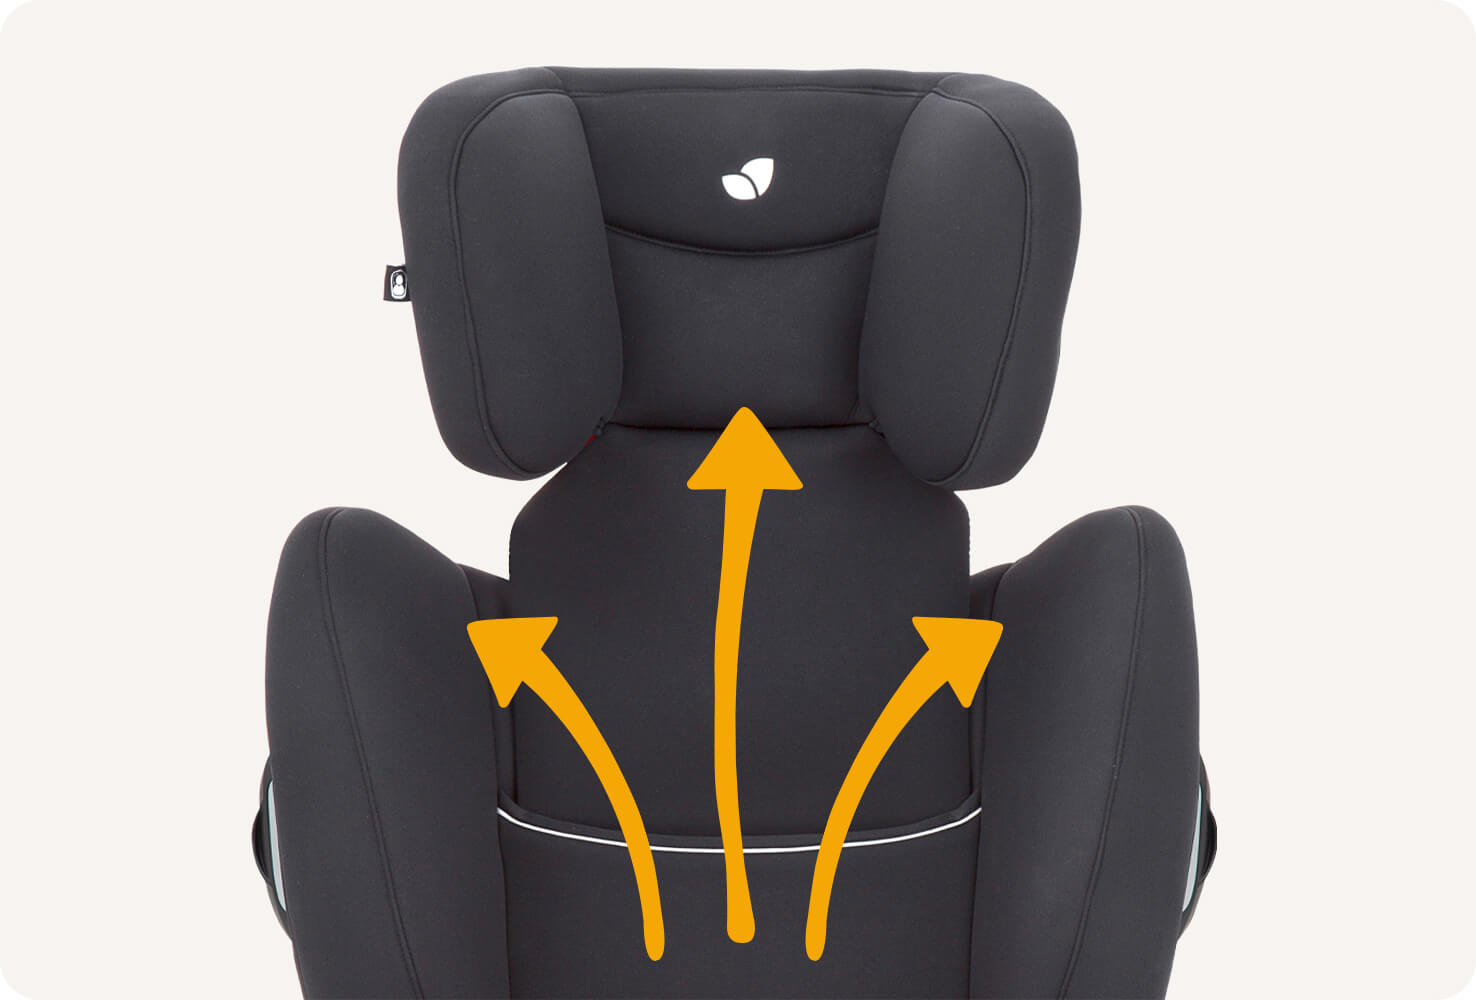  Joie Duallo booster car seat in black facing straight on with the headrest fully extending, and 3 orange arrows indicating growth up and out to the sides.